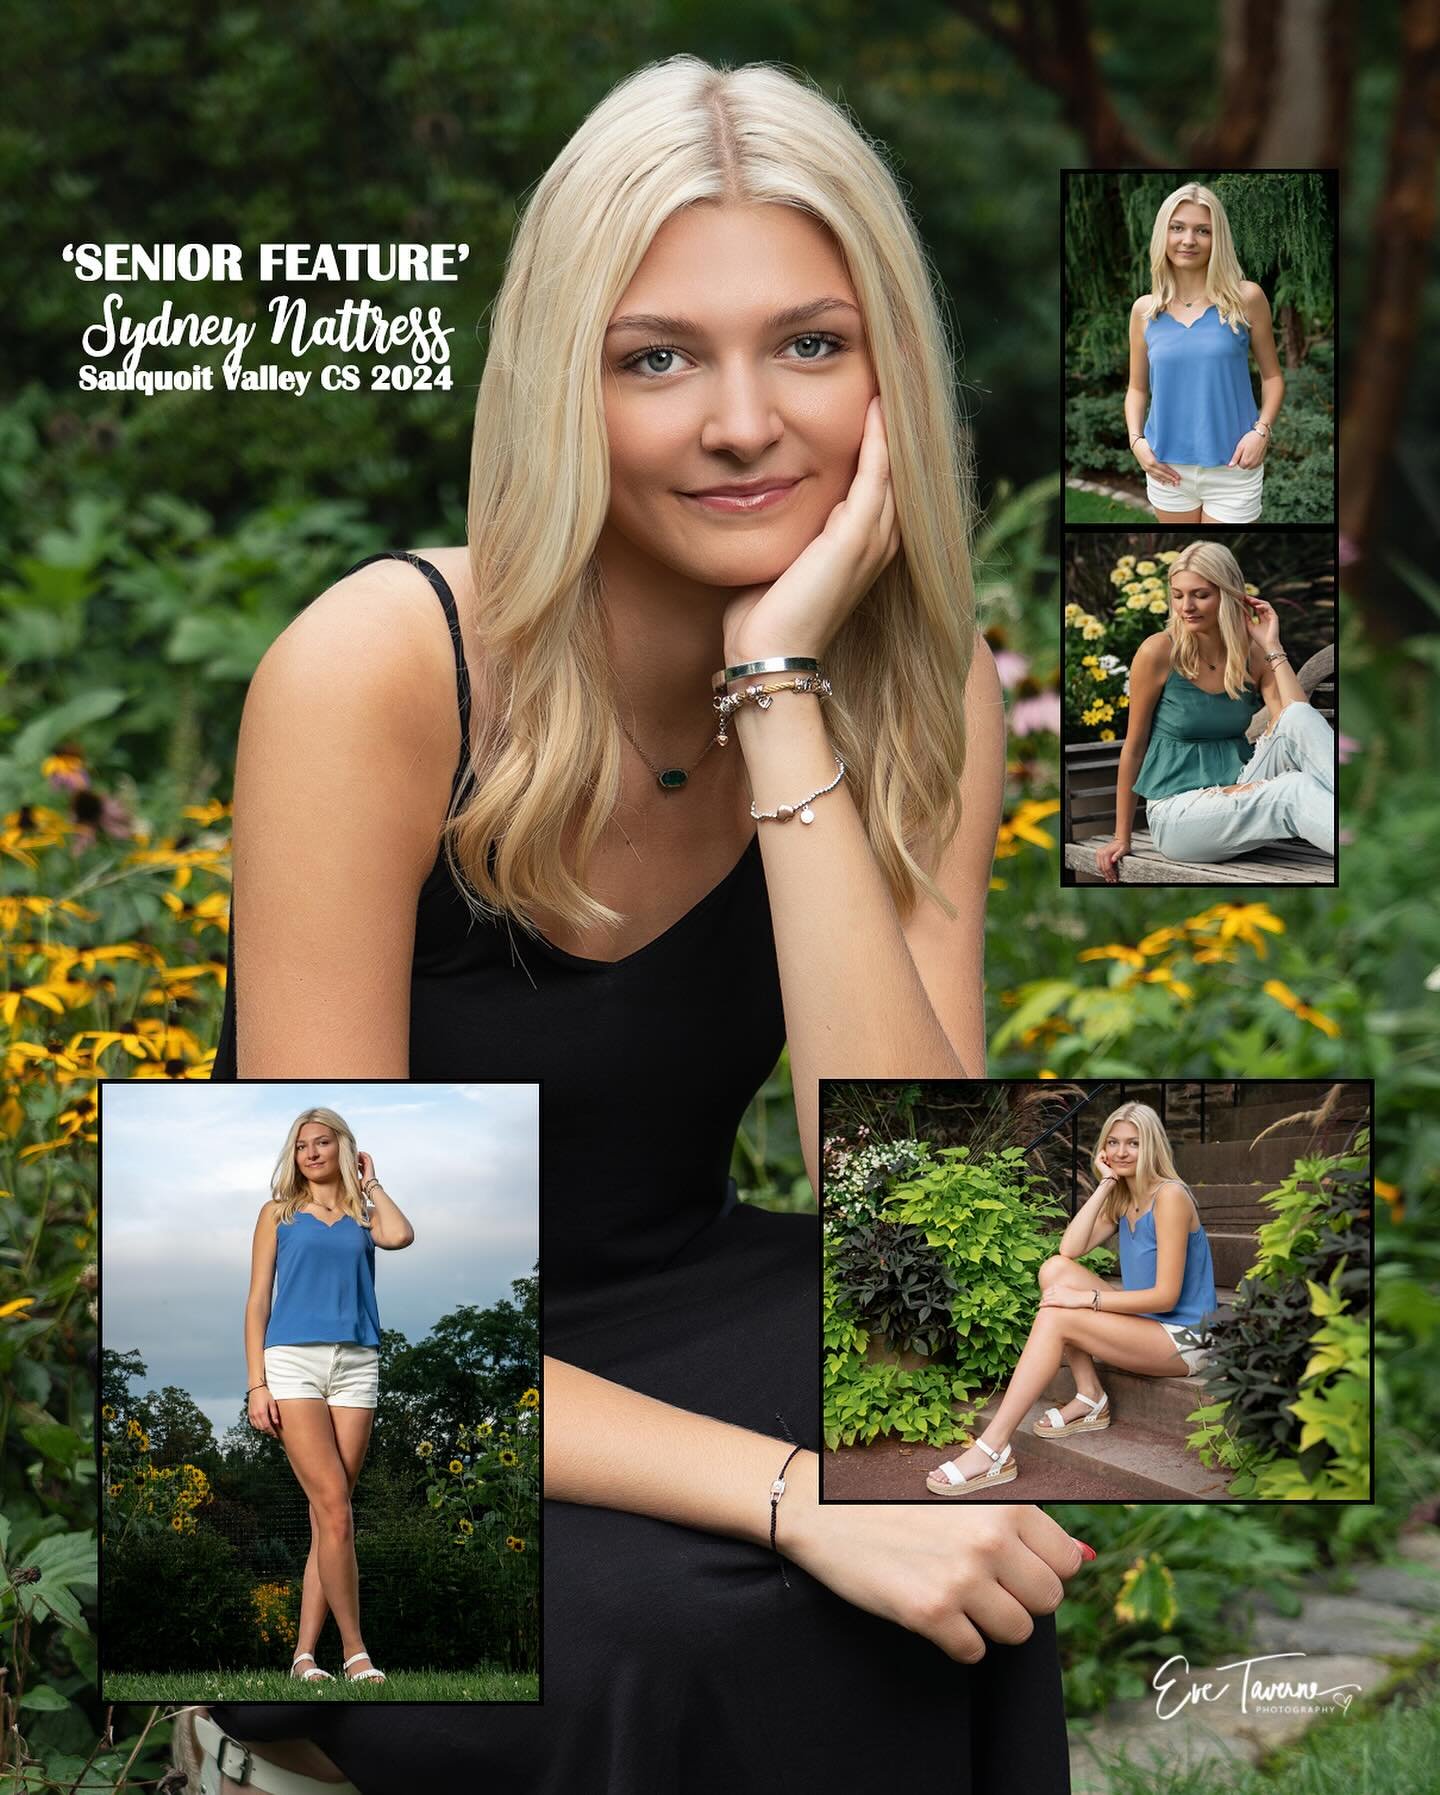 SENIOR FEATURE! Sydney Nattress
Sauquoit Valley HS
#Classof2024
#ETPSeniorFeature 
@sydneynattress 

Congratulations Sydney on your high school career, and all the best to you on your future endeavors. I&rsquo;m so grateful for the opportunity to pho